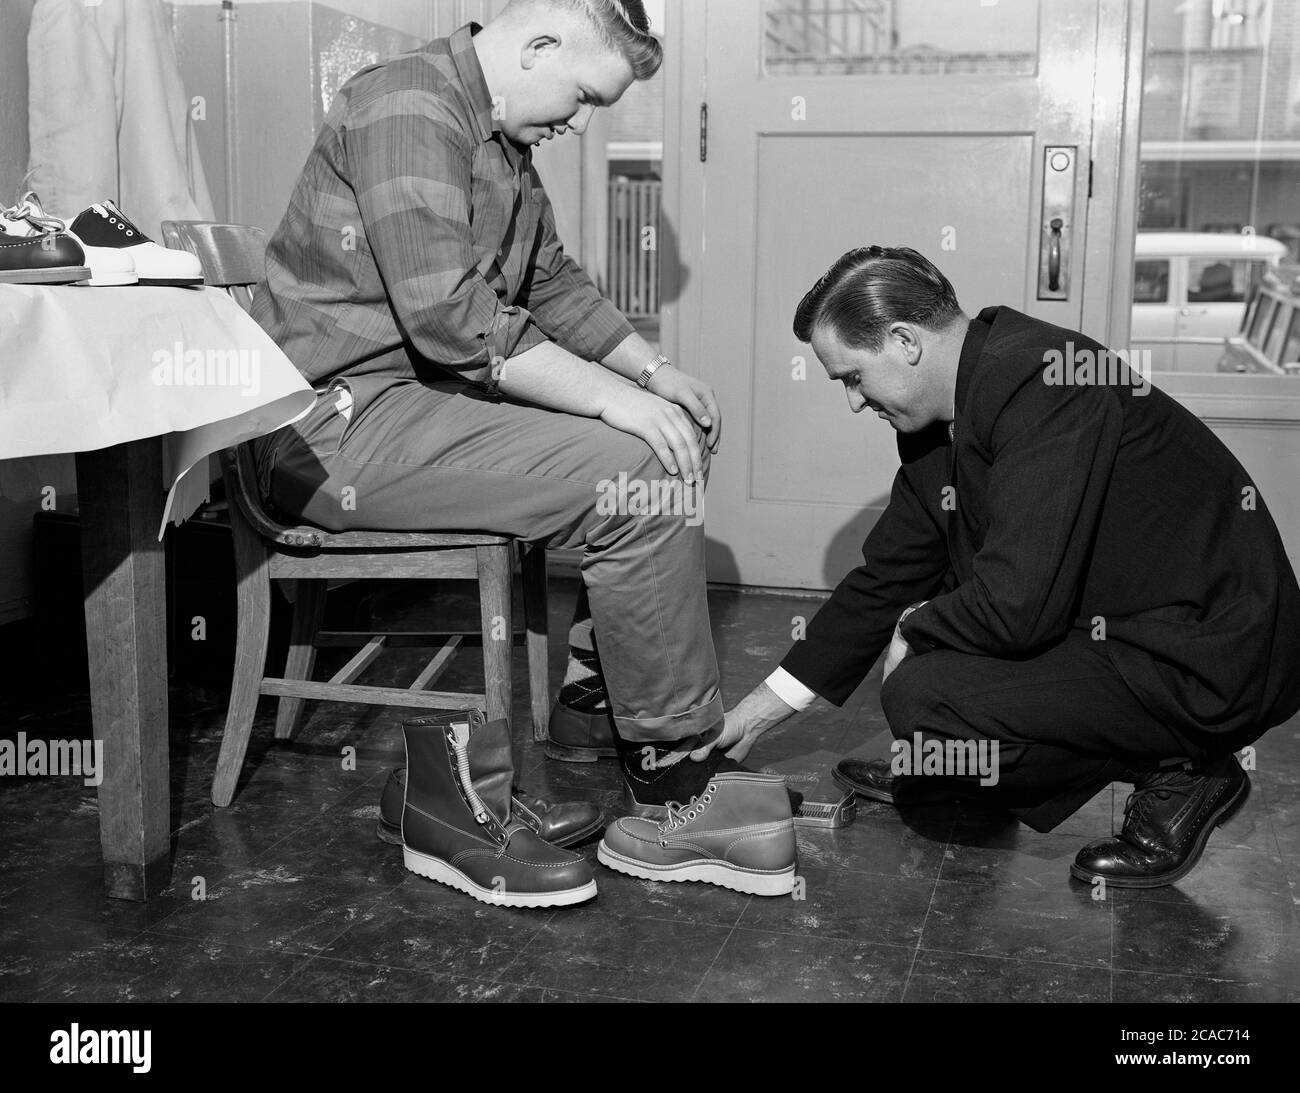 circa, 1940s, historical, inside a midwest American retail store, a young man sitton on a chair having his foot measured by a salesman, for a pair of new lightweight industrial leather safety work boots, USA. Stock Photo